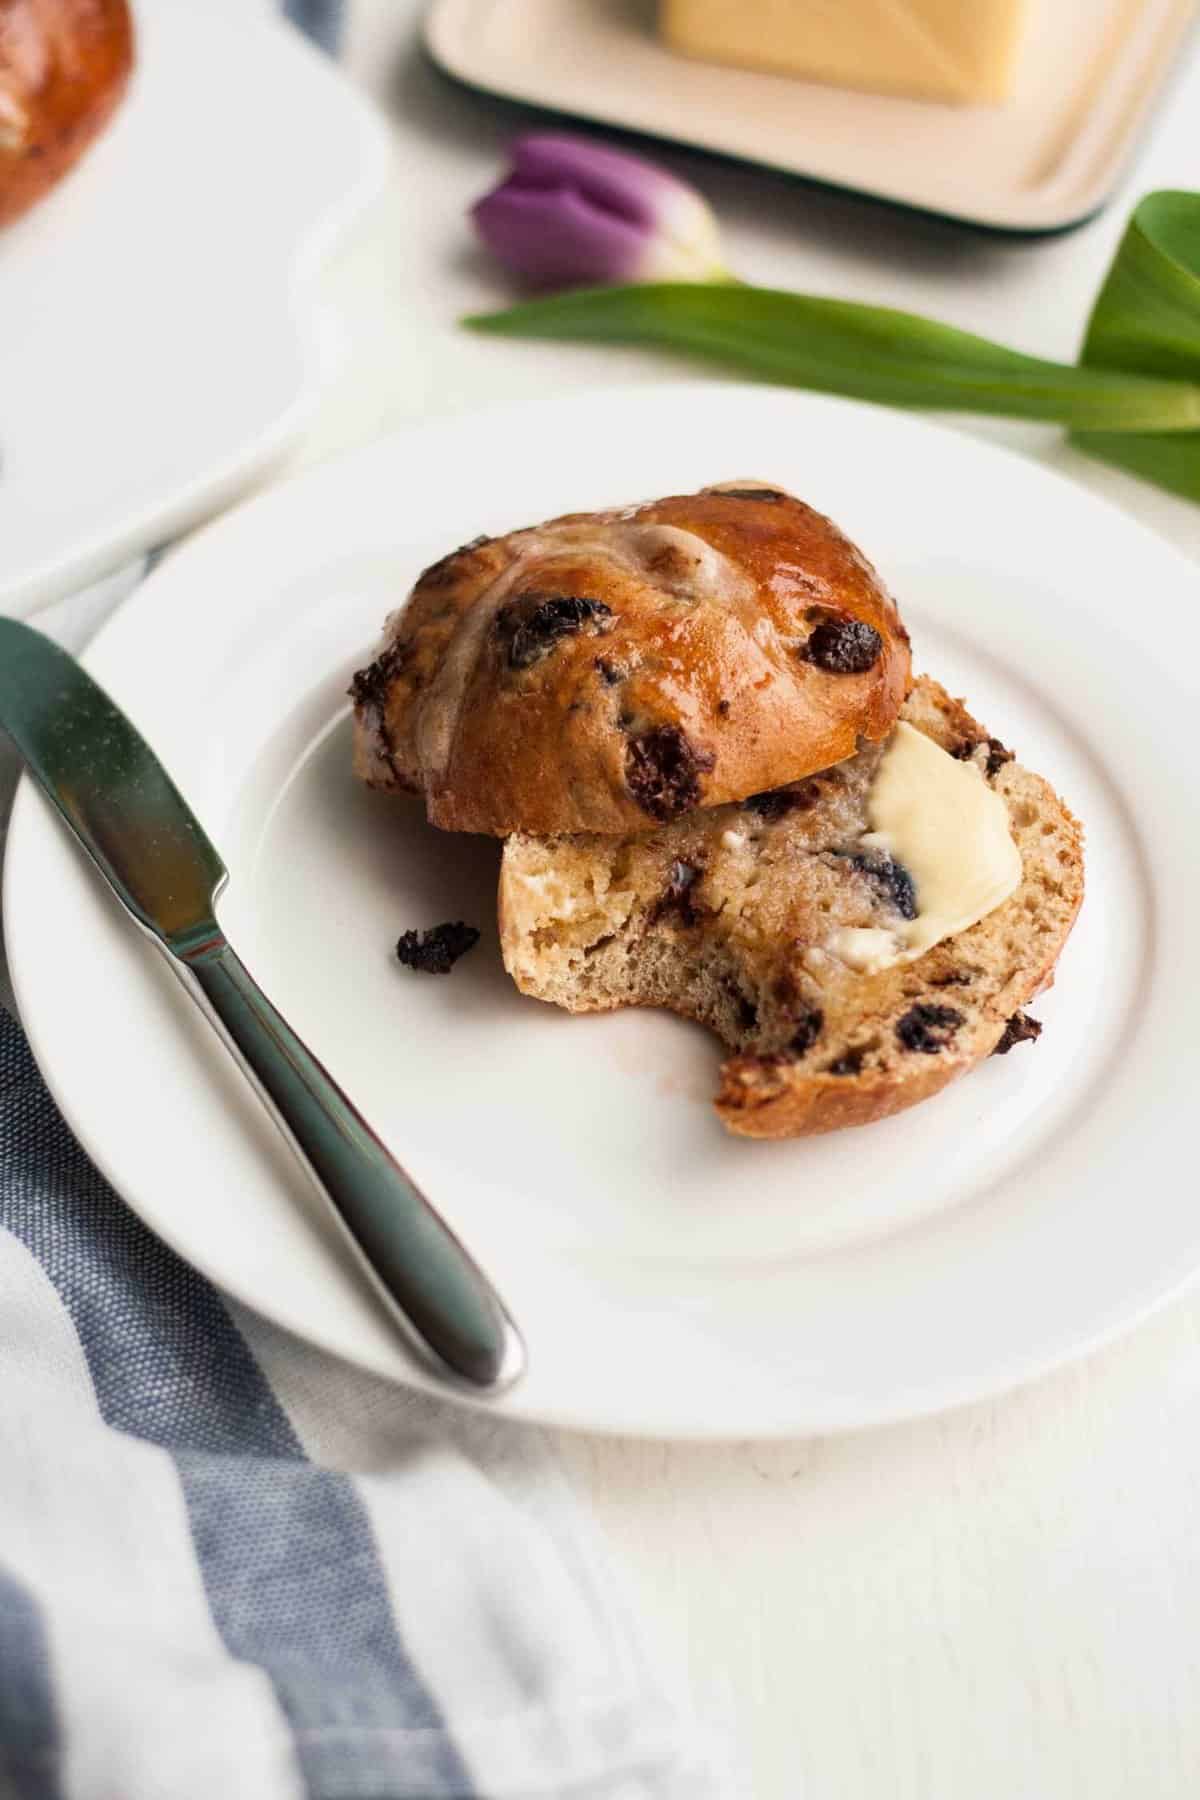 A plate with a cut open hot cross bun with butter on it and a bite taken.